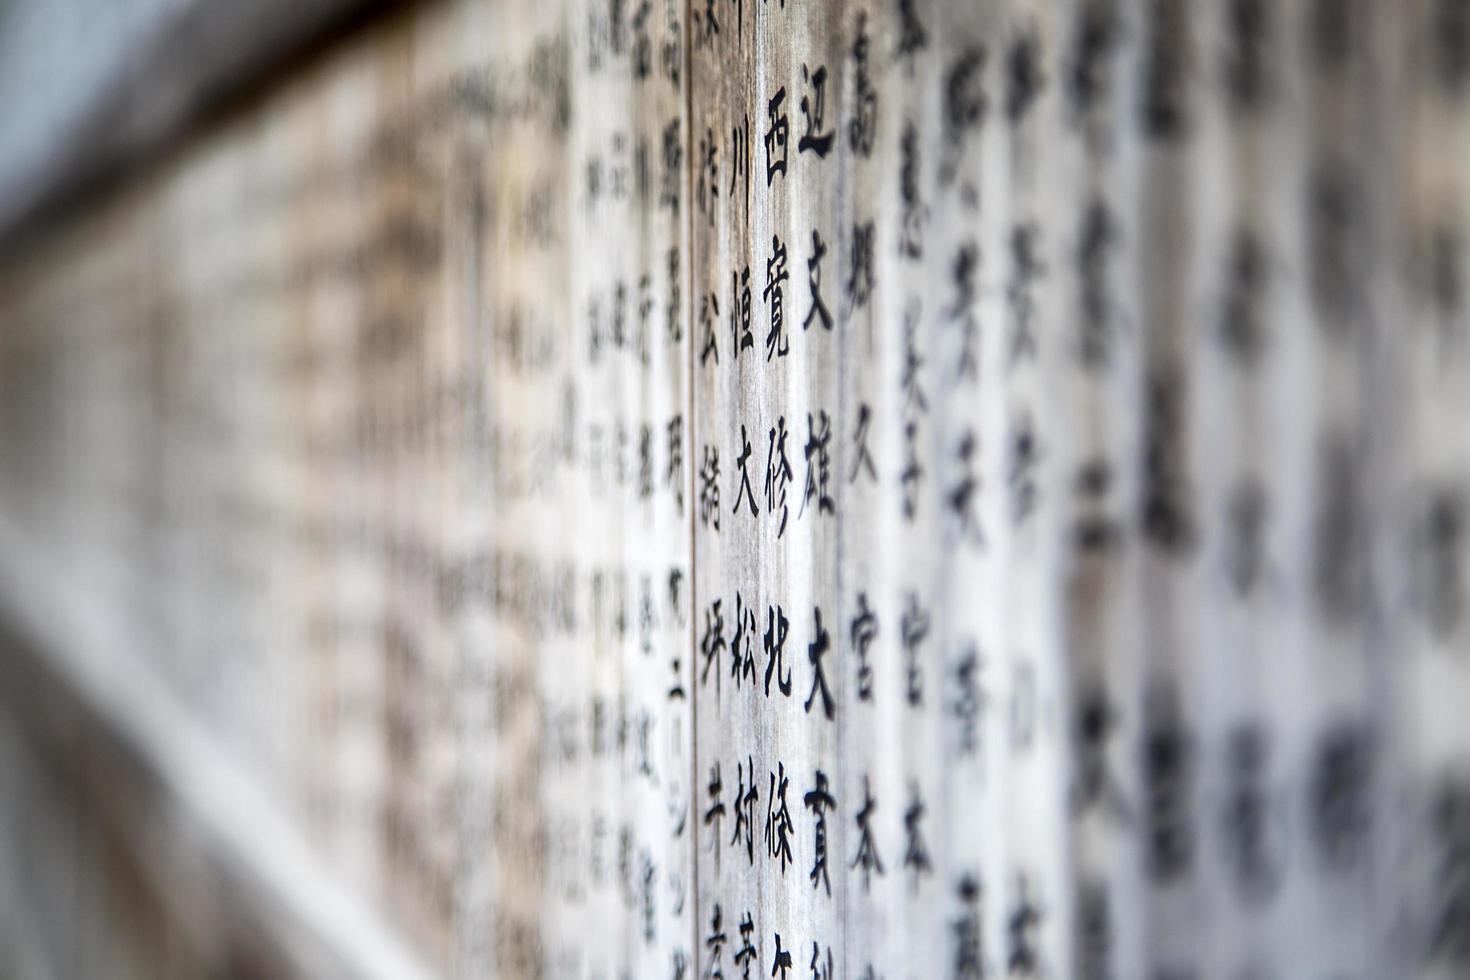 NIKKO, JAPAN, 2016 - Wooden boards with Japanese script outside of temple in Nikko, Japan. Nikko shrines and temples are UNESCO World Heritage Site photo